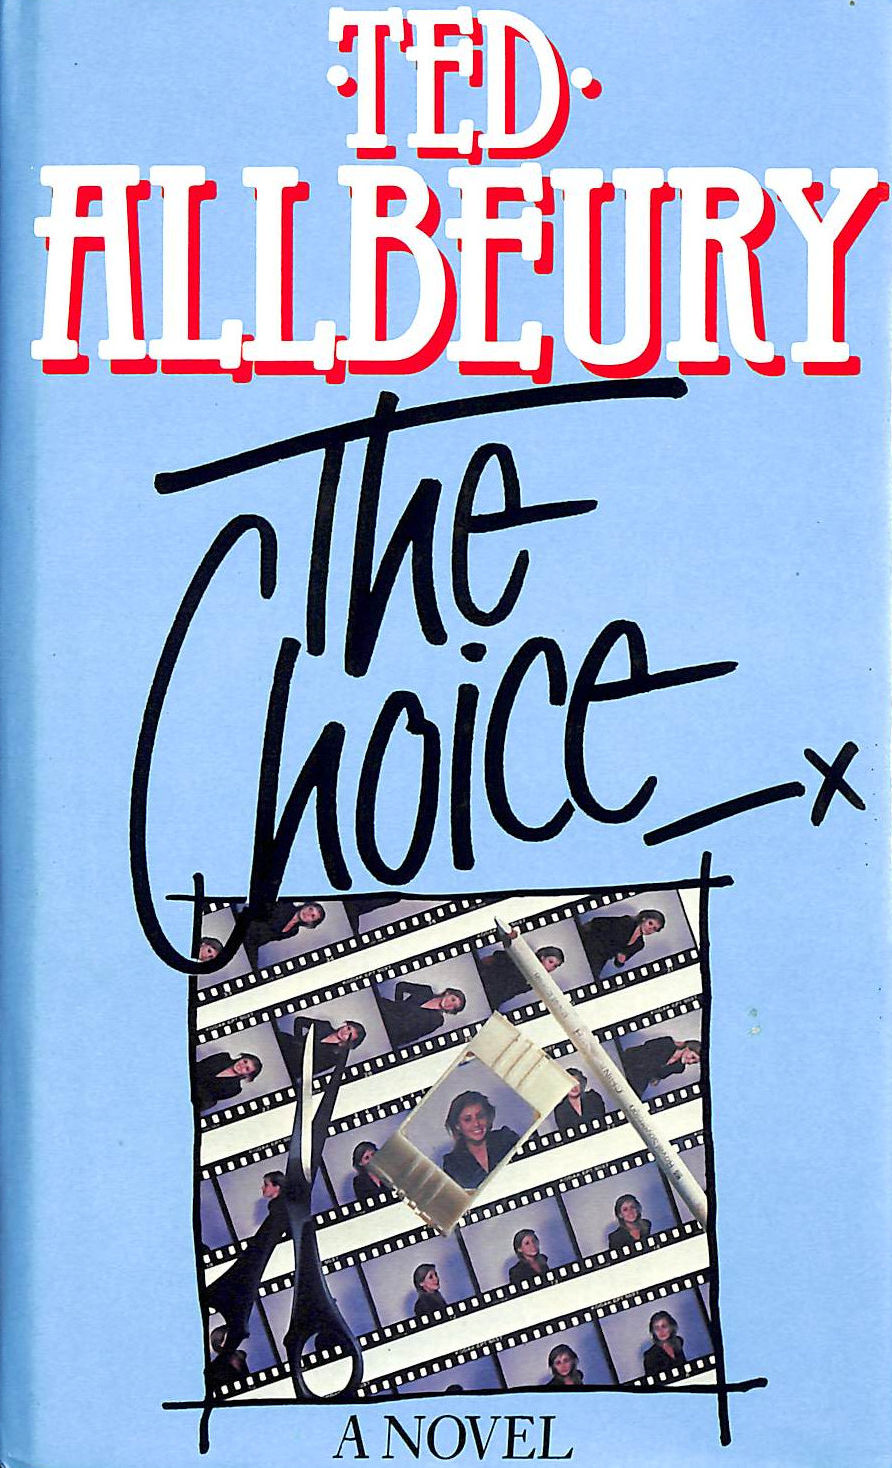 ALLBEURY, TED - The Choice